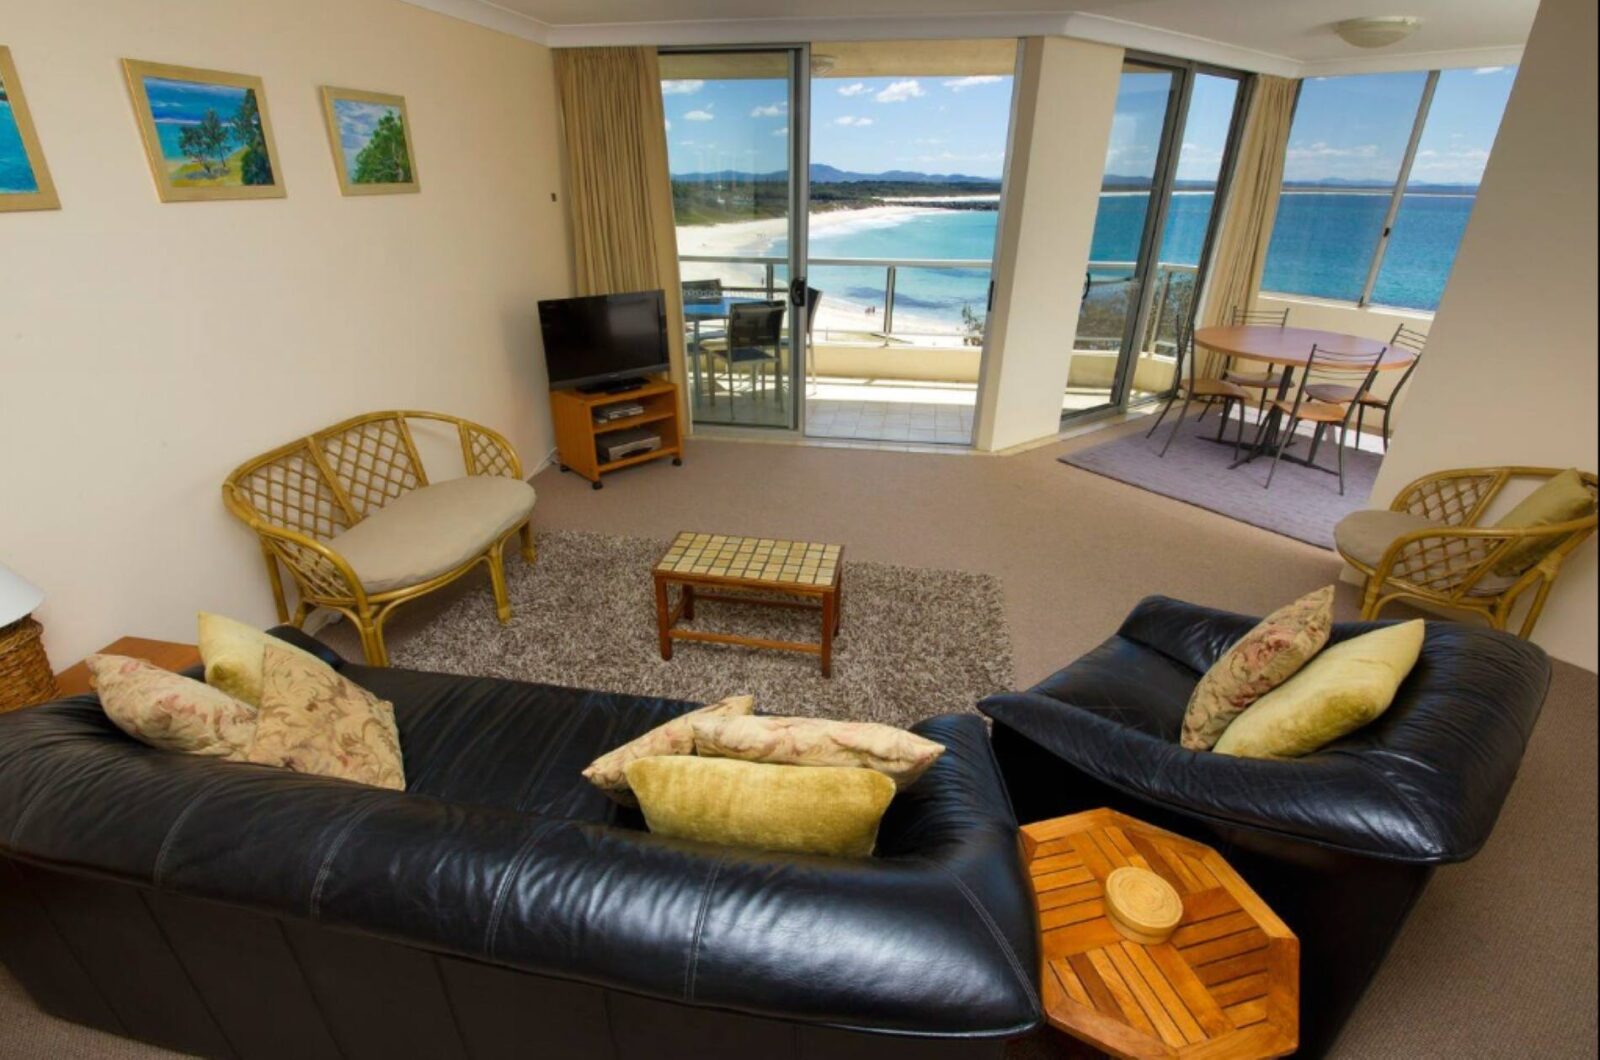 Living room with lounges, TV and ocean views